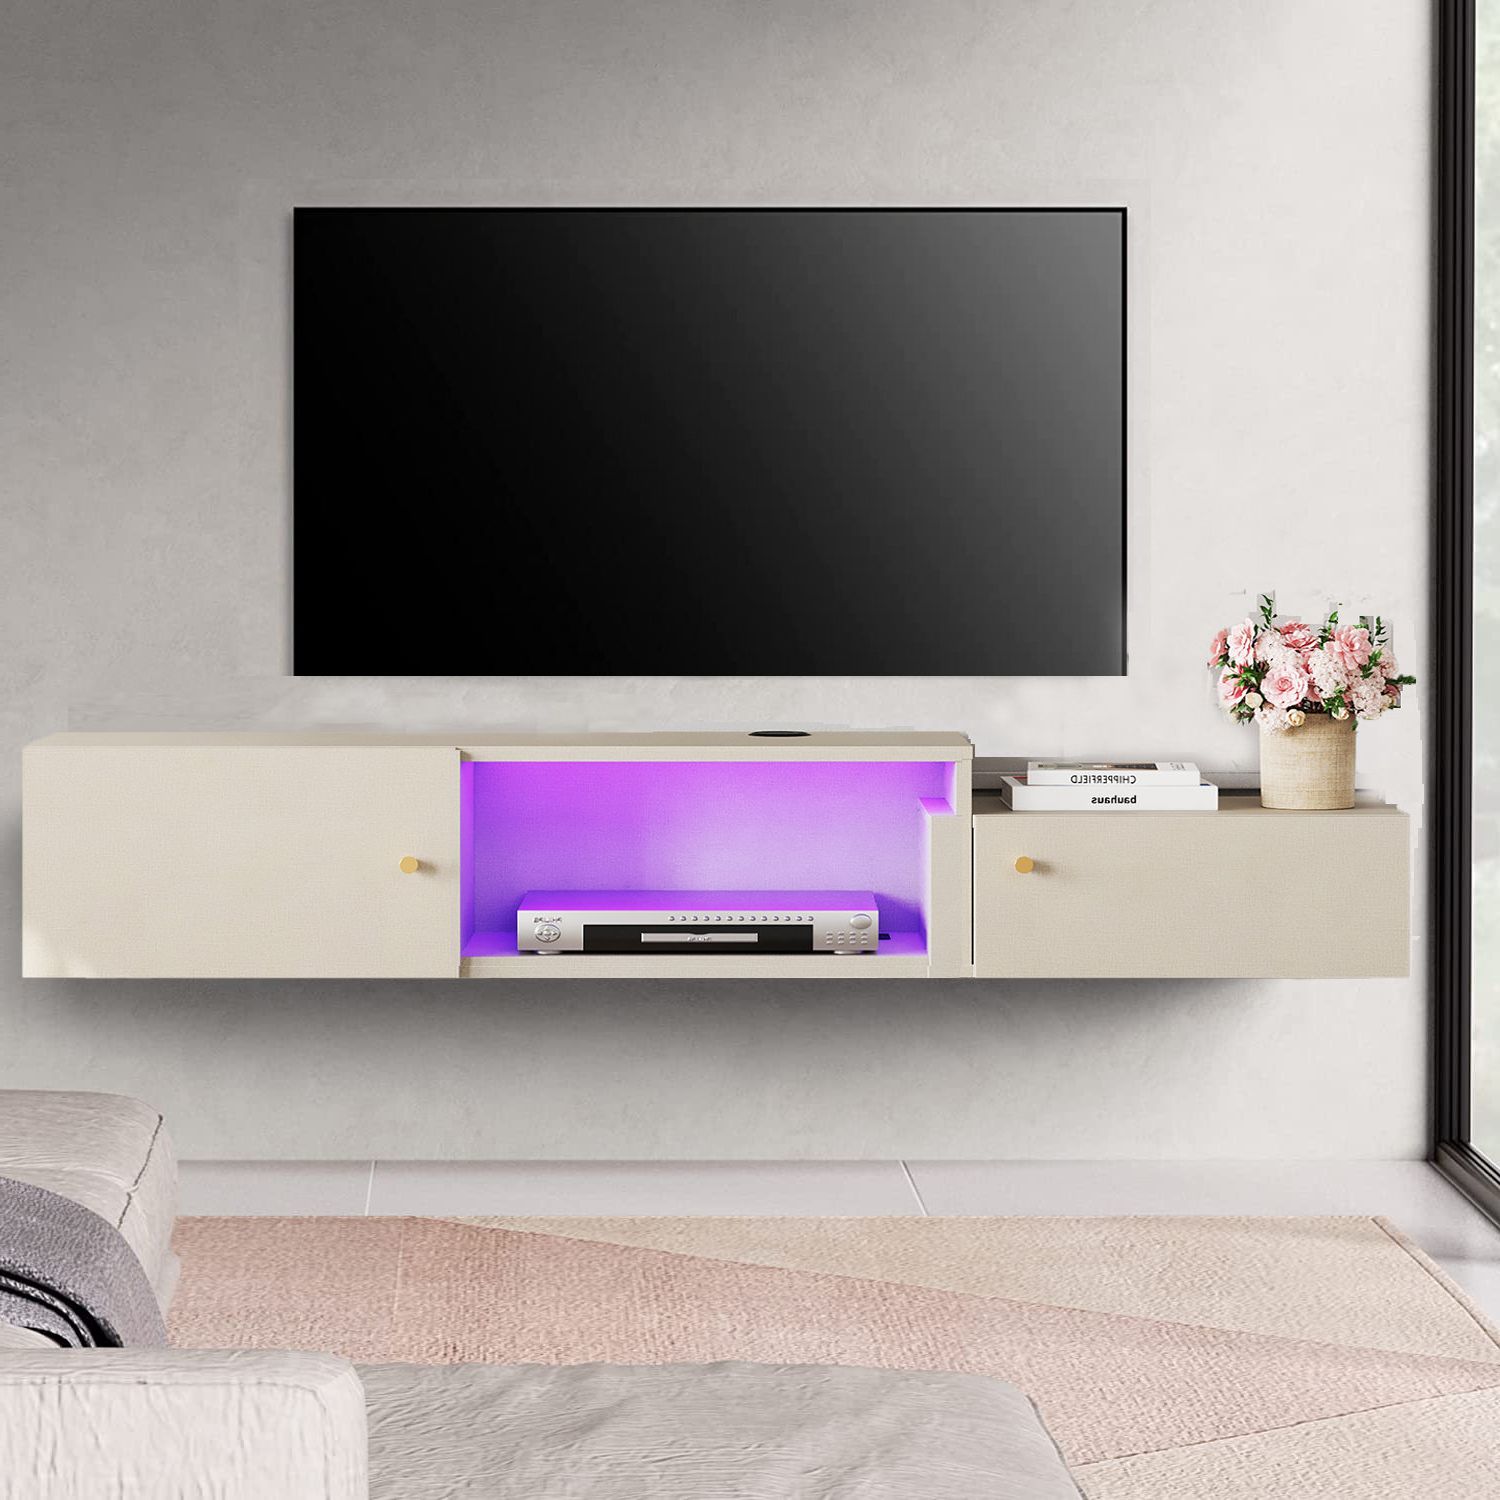 Wrought Studio Bobbi Floating Tv Stand For Tvs Up To 88" | Wayfair For Floating Stands For Tvs (View 7 of 20)